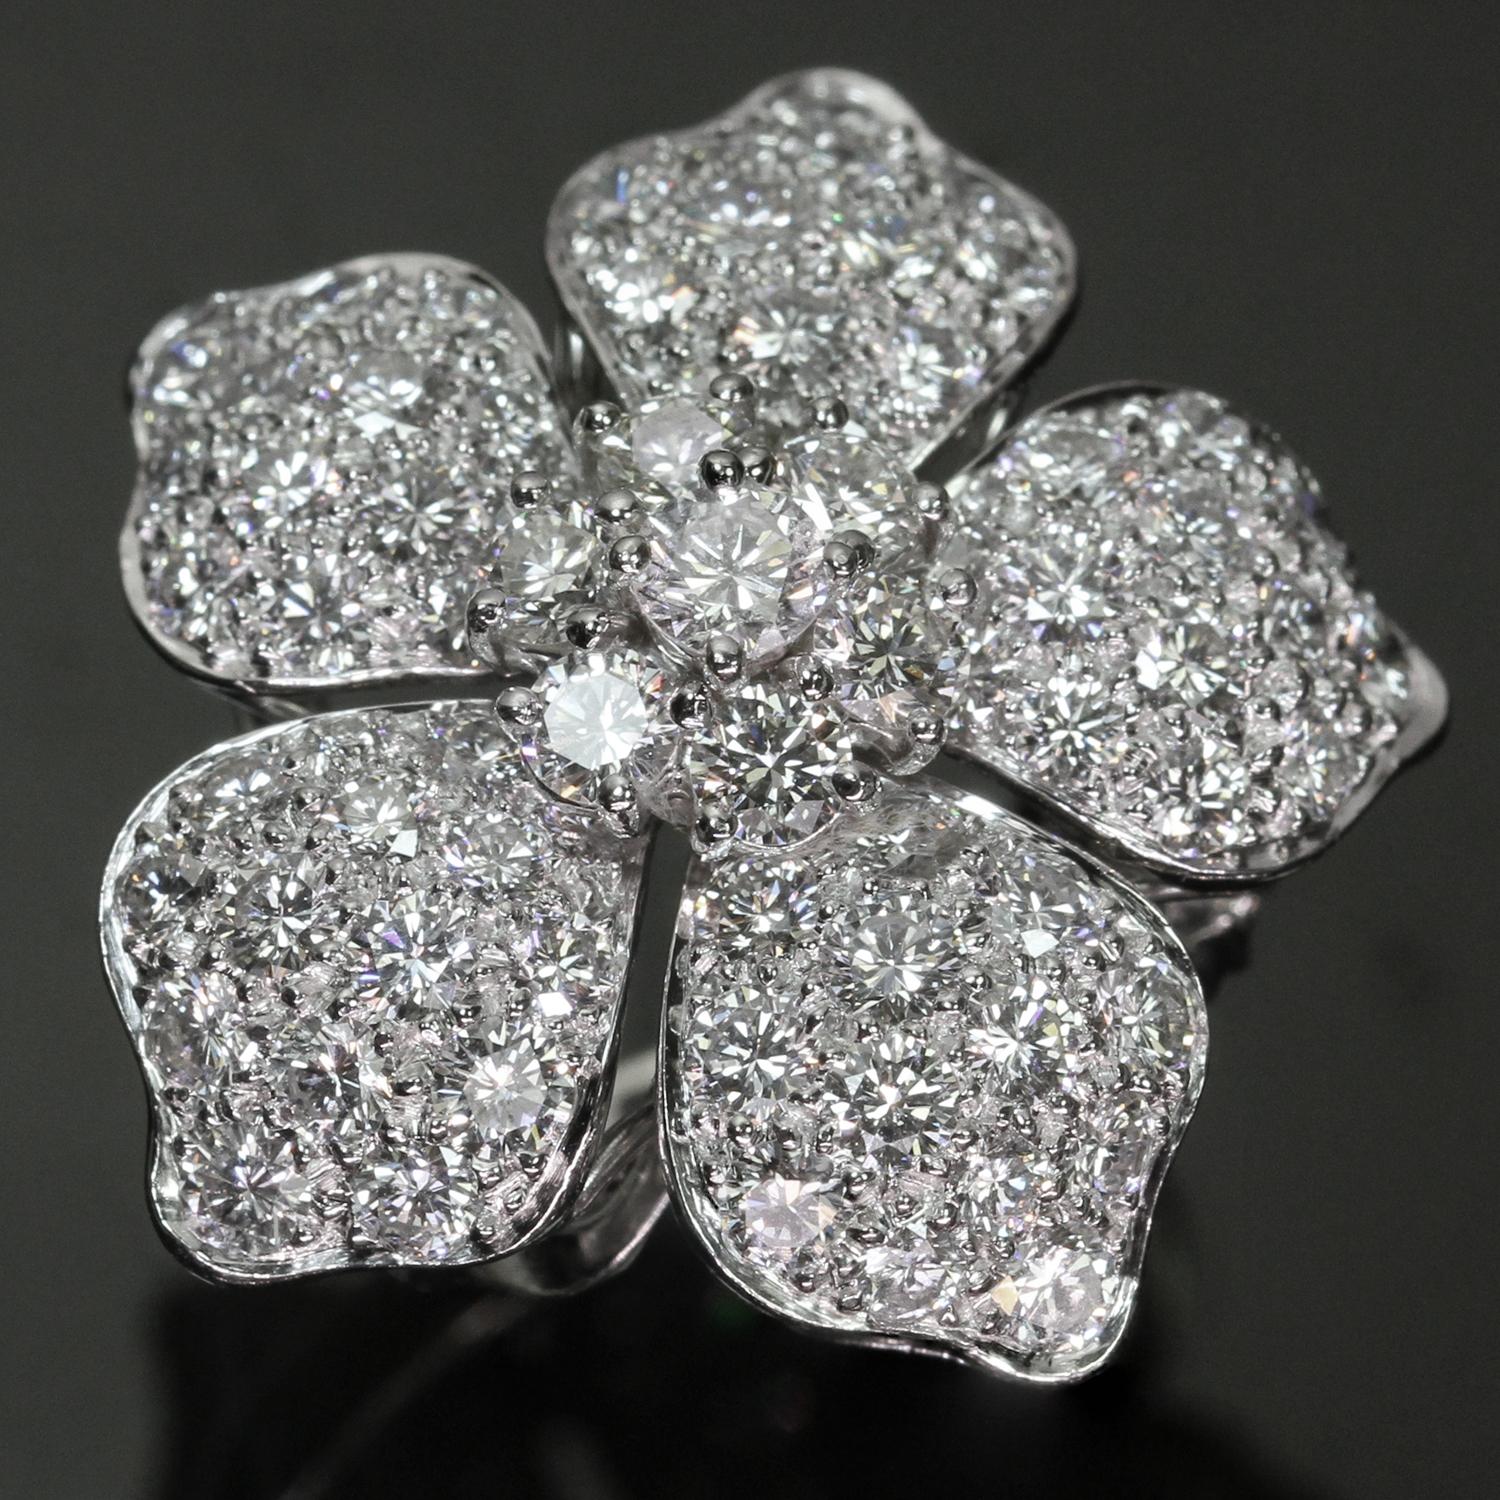 This fabulous rare authentic Van Cleef & Arpels ring from the gorgeous Hawaii collection features a flower design crafted in platinum and set with approximately 67 diamonds on petals and 7 diamonds in the center. The round brilliant VVS1-VVS2